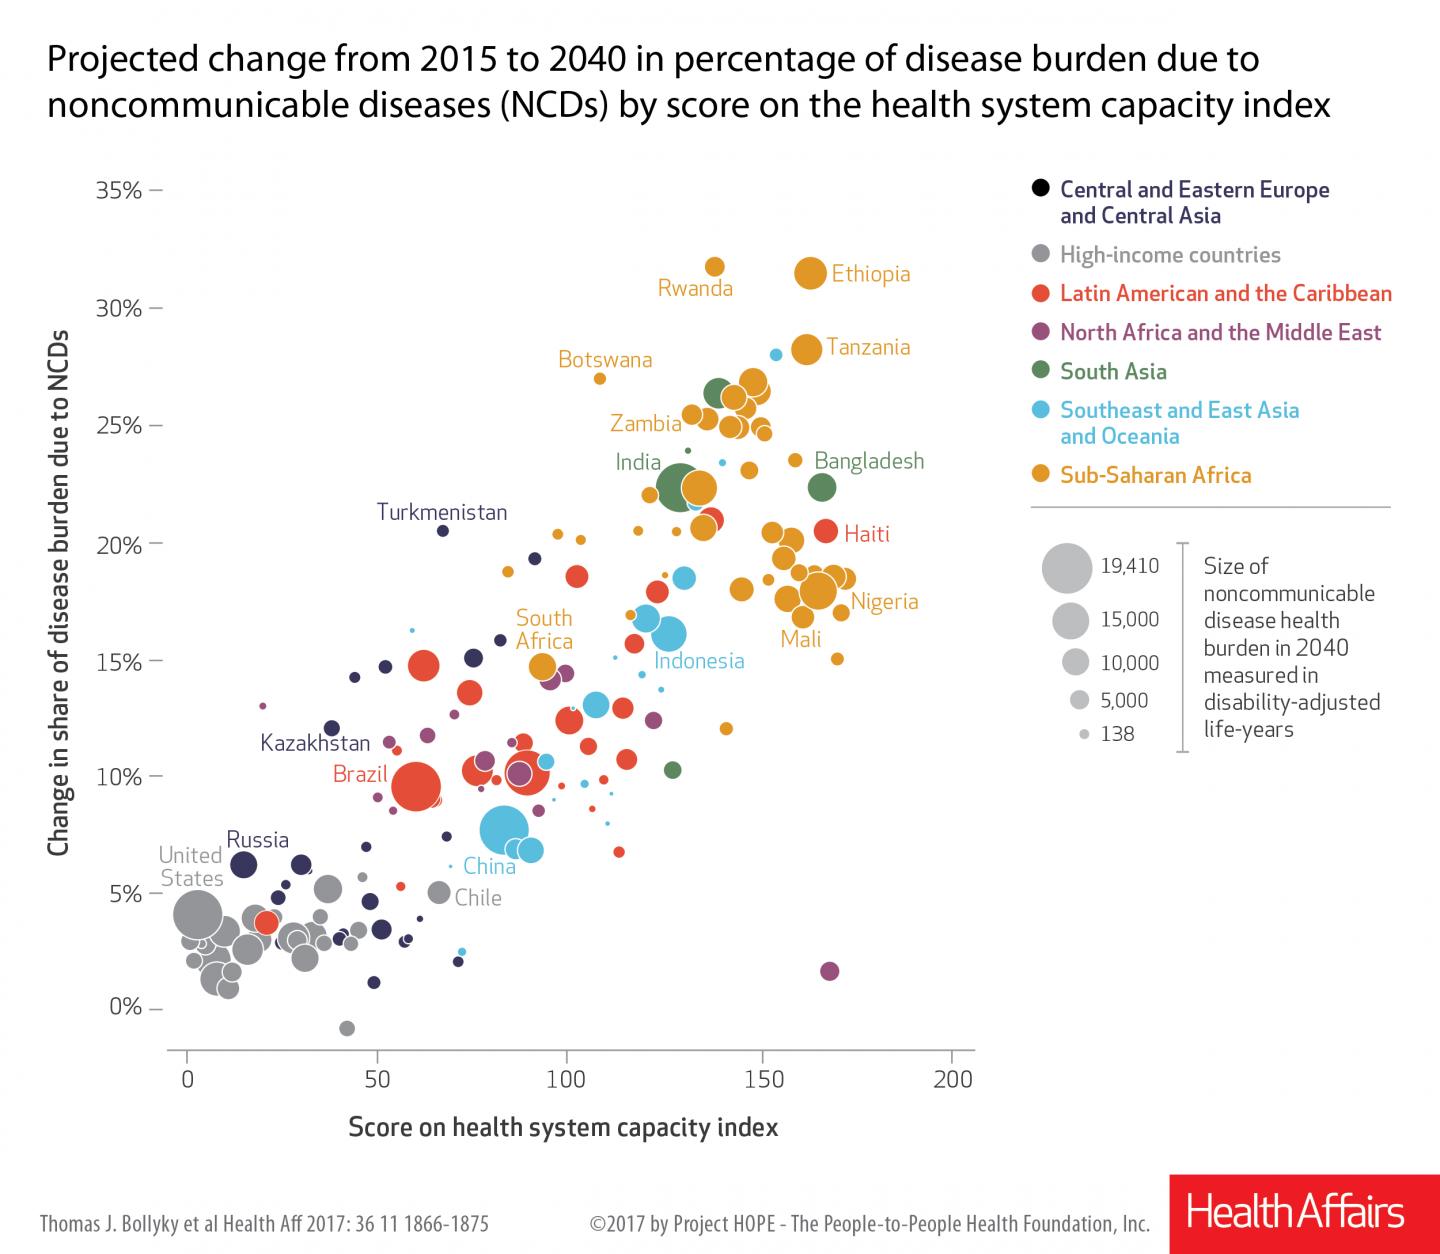 Projected Change from 2015 to 2040 in Percentage of Disease Burden Due to Noncommunicable Diseases